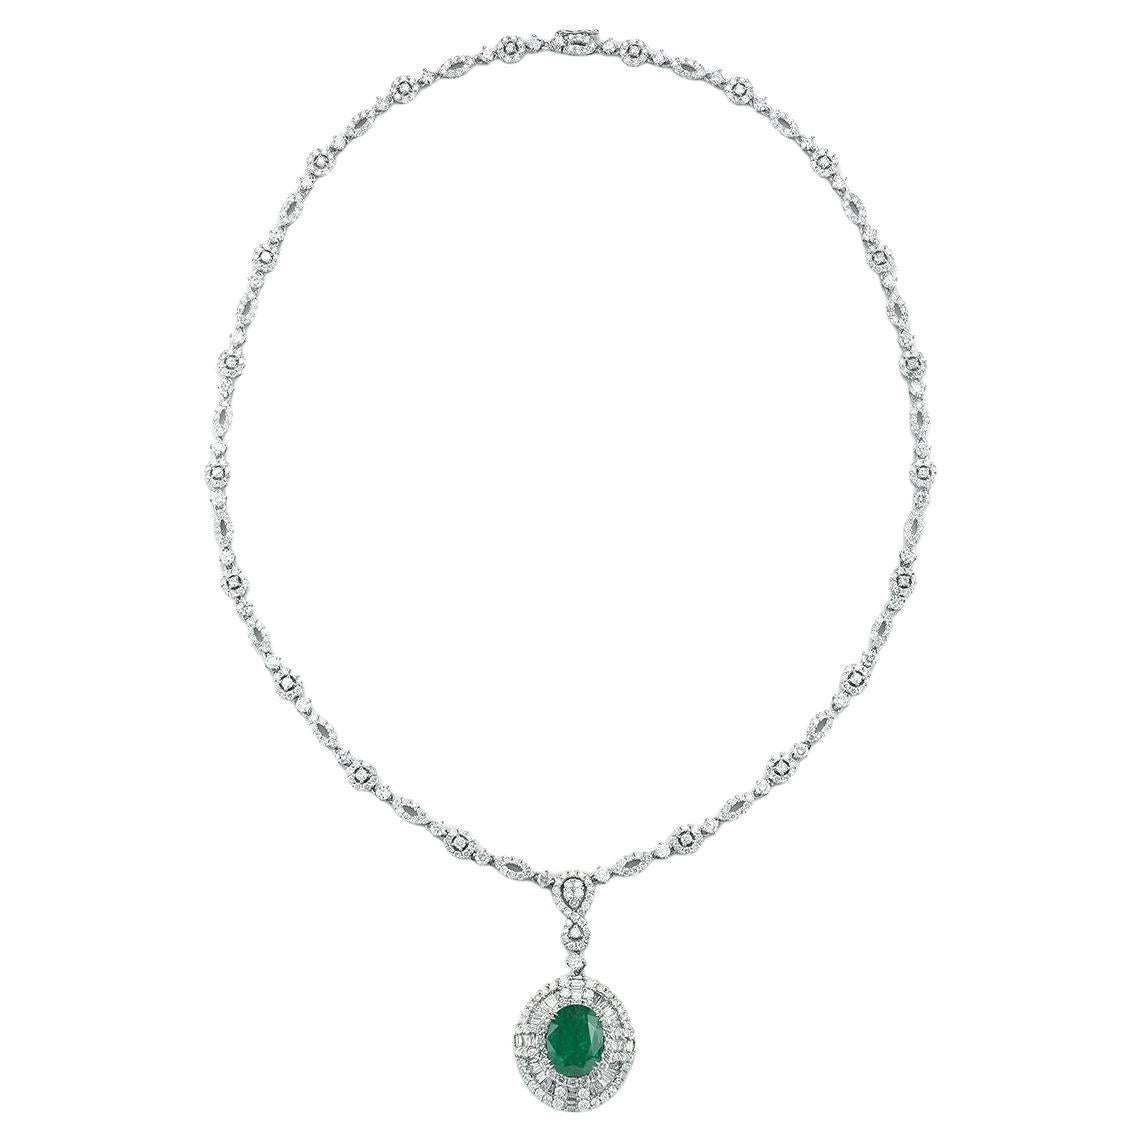 18k White Gold 4.37ct Emerald And 8.16ct Diamond Necklace For Sale